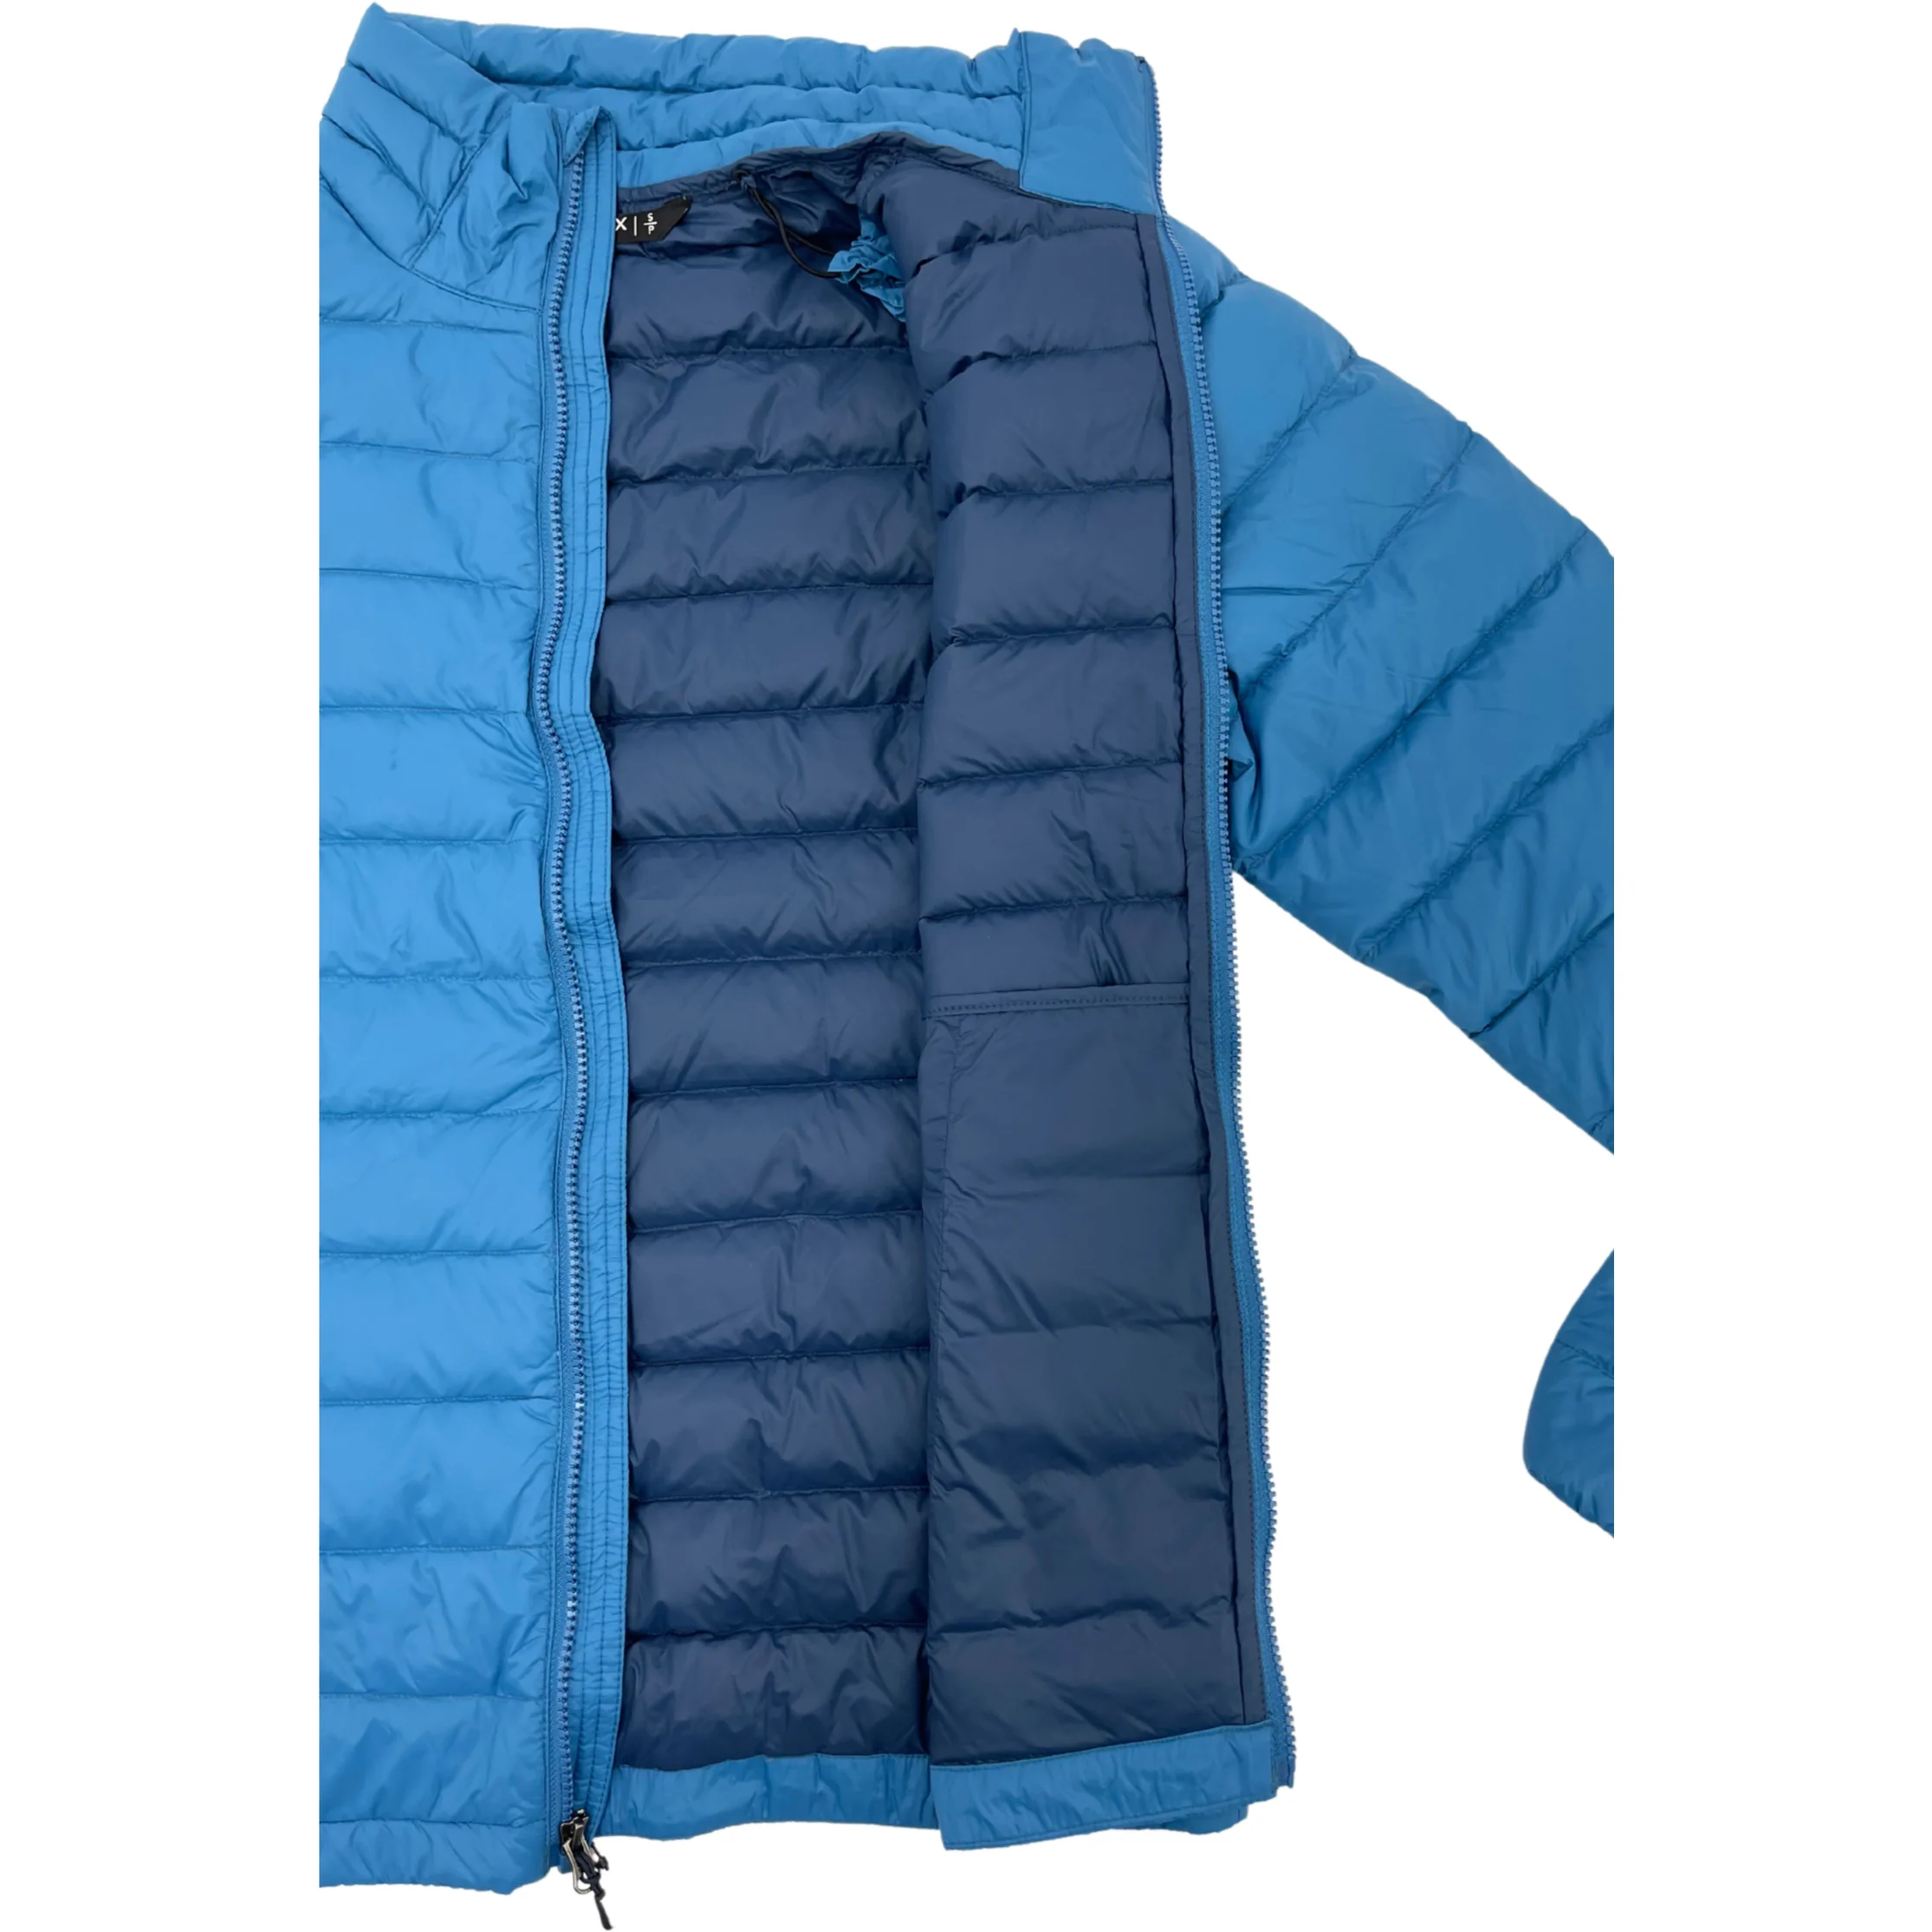 Paradox Men's Lightweight Jacket / Puffer Style Jacket / Bright Blue / Various Sizes